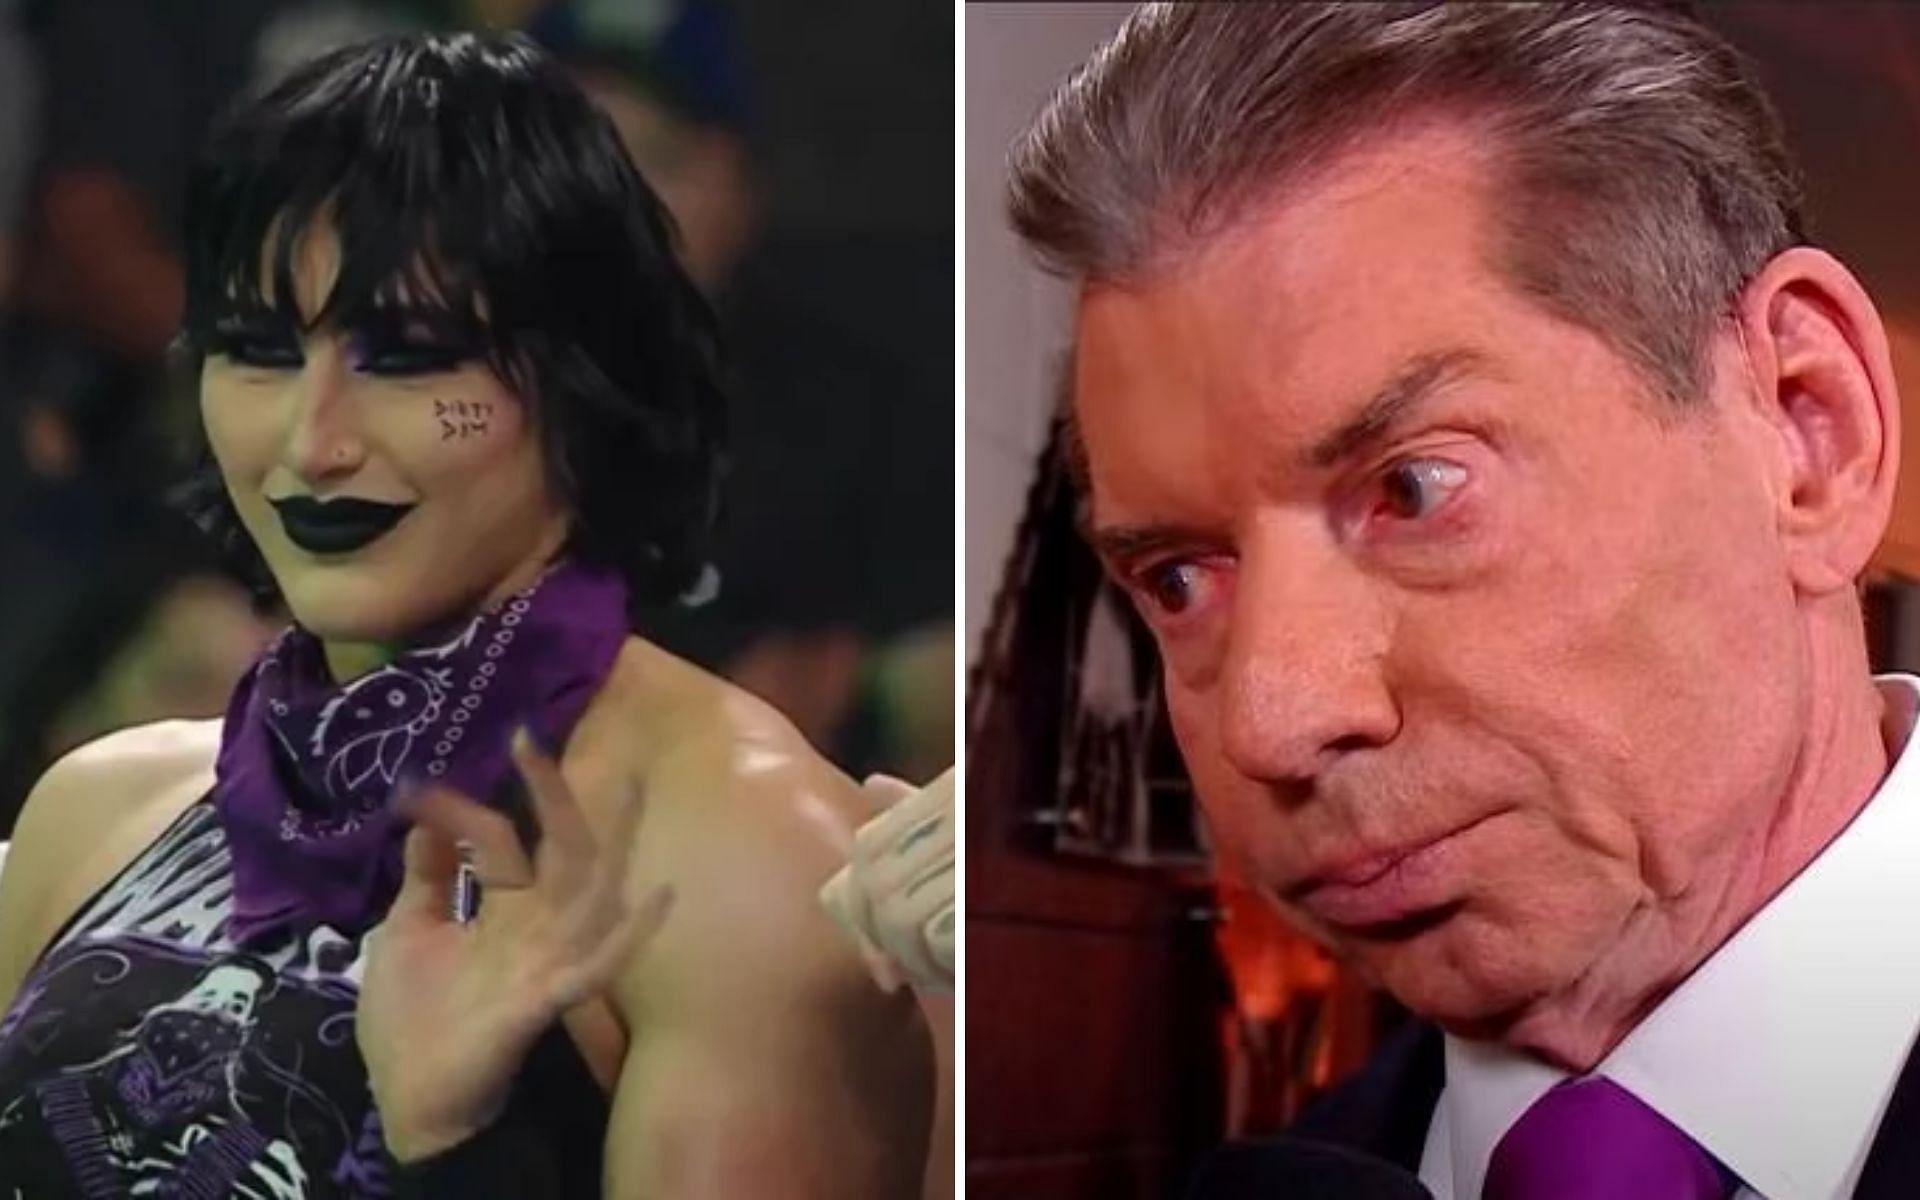 Vince Russo criticized Ripley for not understanding the old school ways of wrestling